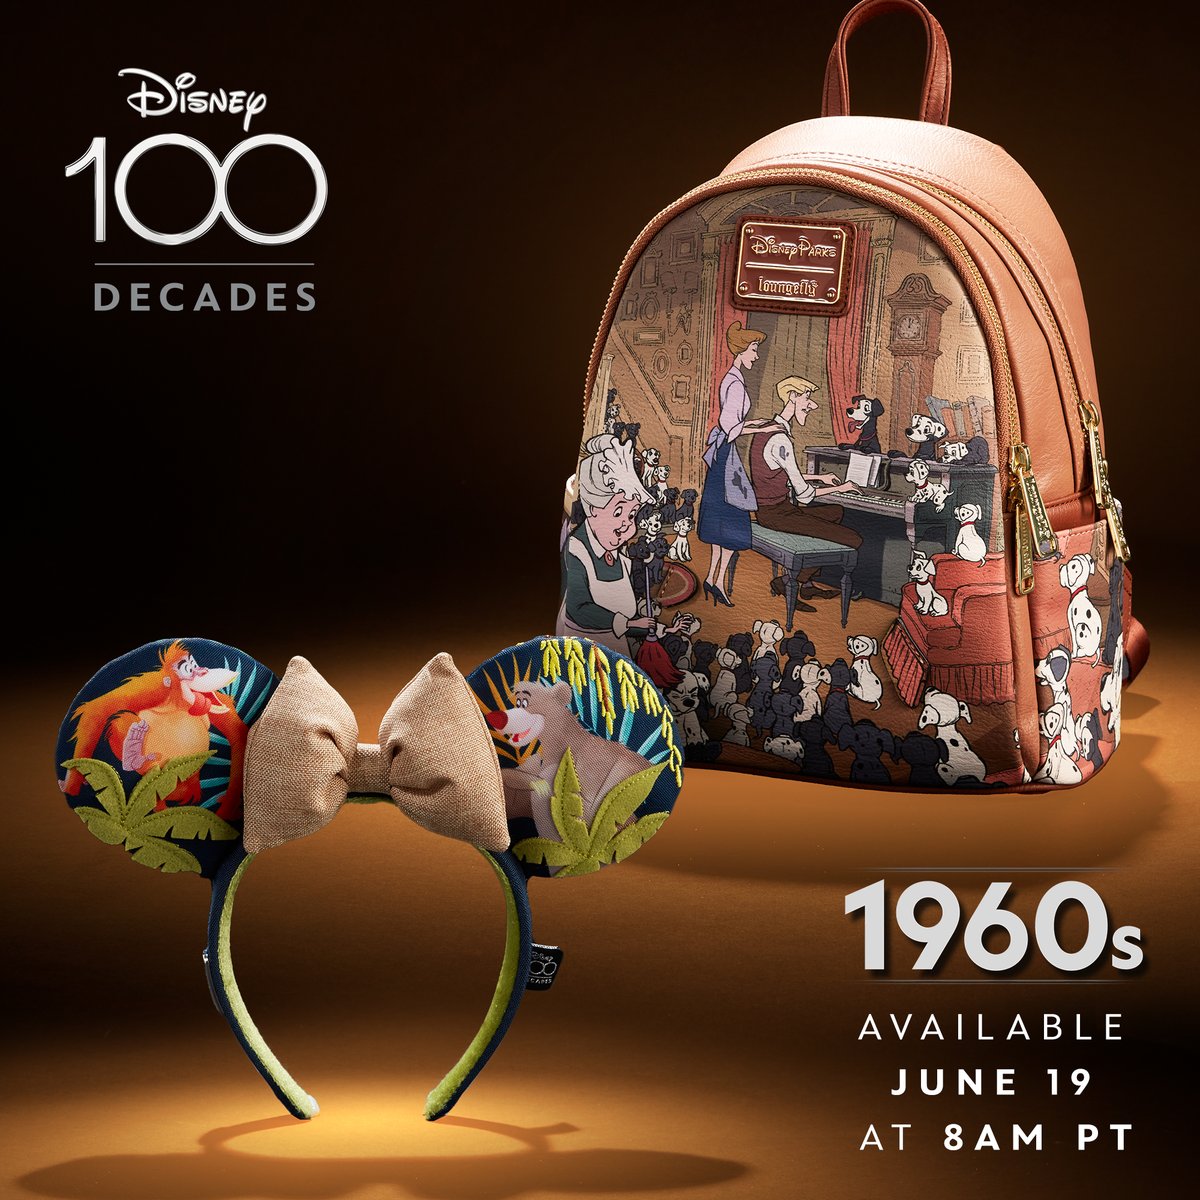 Just spotted! The latest drop of the Disney100 Decades Collection Series celebrating the 1960s arrives June 19 at 8AM PT. di.sn/6014O0NSm